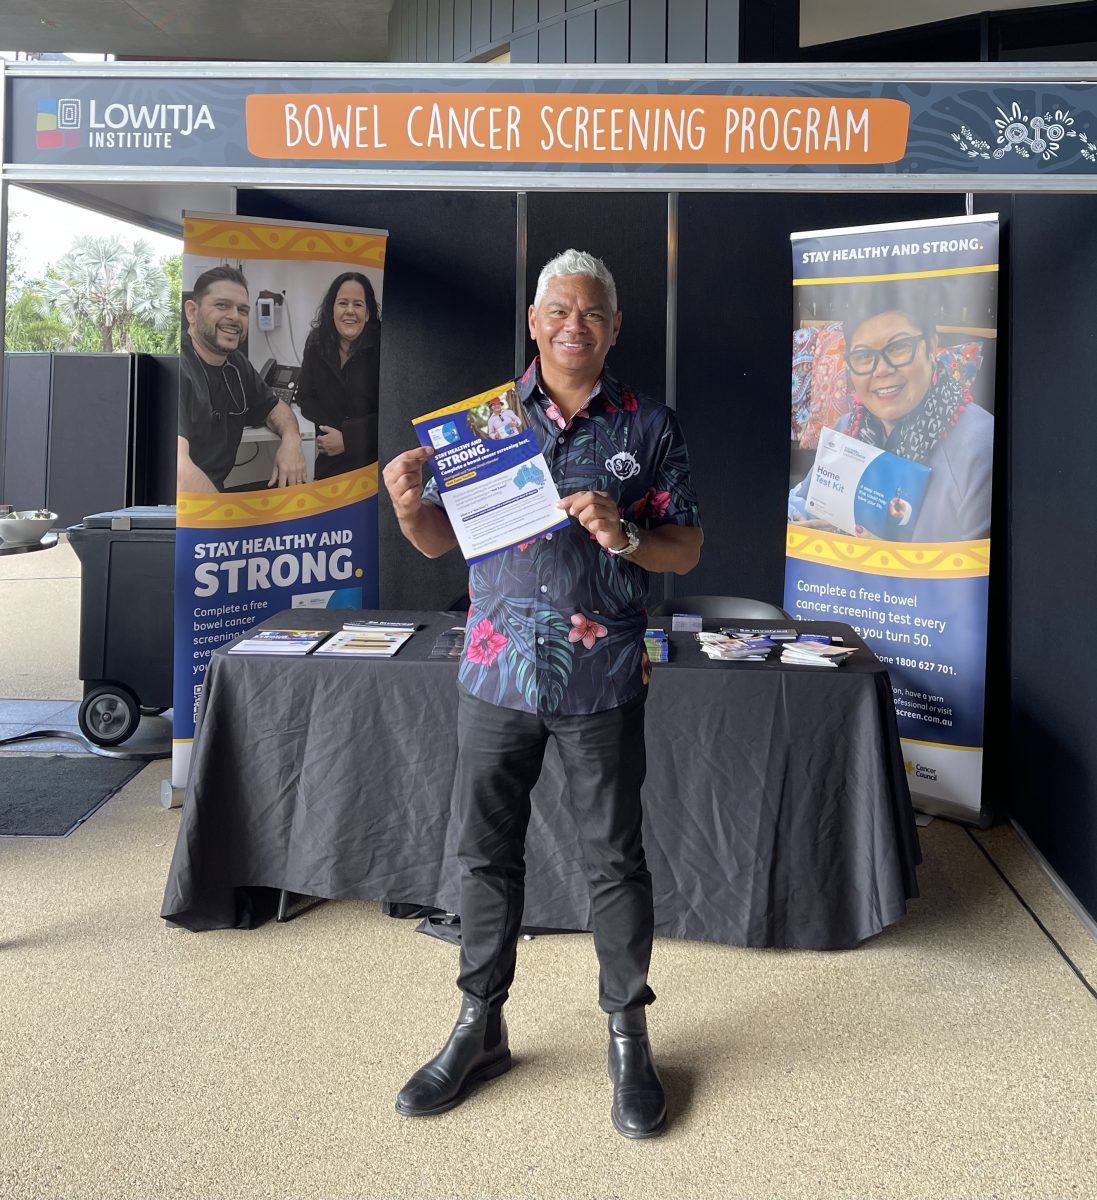 John Paul Janke with white hair, a navy blue button down with pink and orange flowers, black pants and black boots. He is standing in front of a bowel cancer screening program outdoor stall setup, and is smiling at the camera holding a bowel cancer screening flyer.